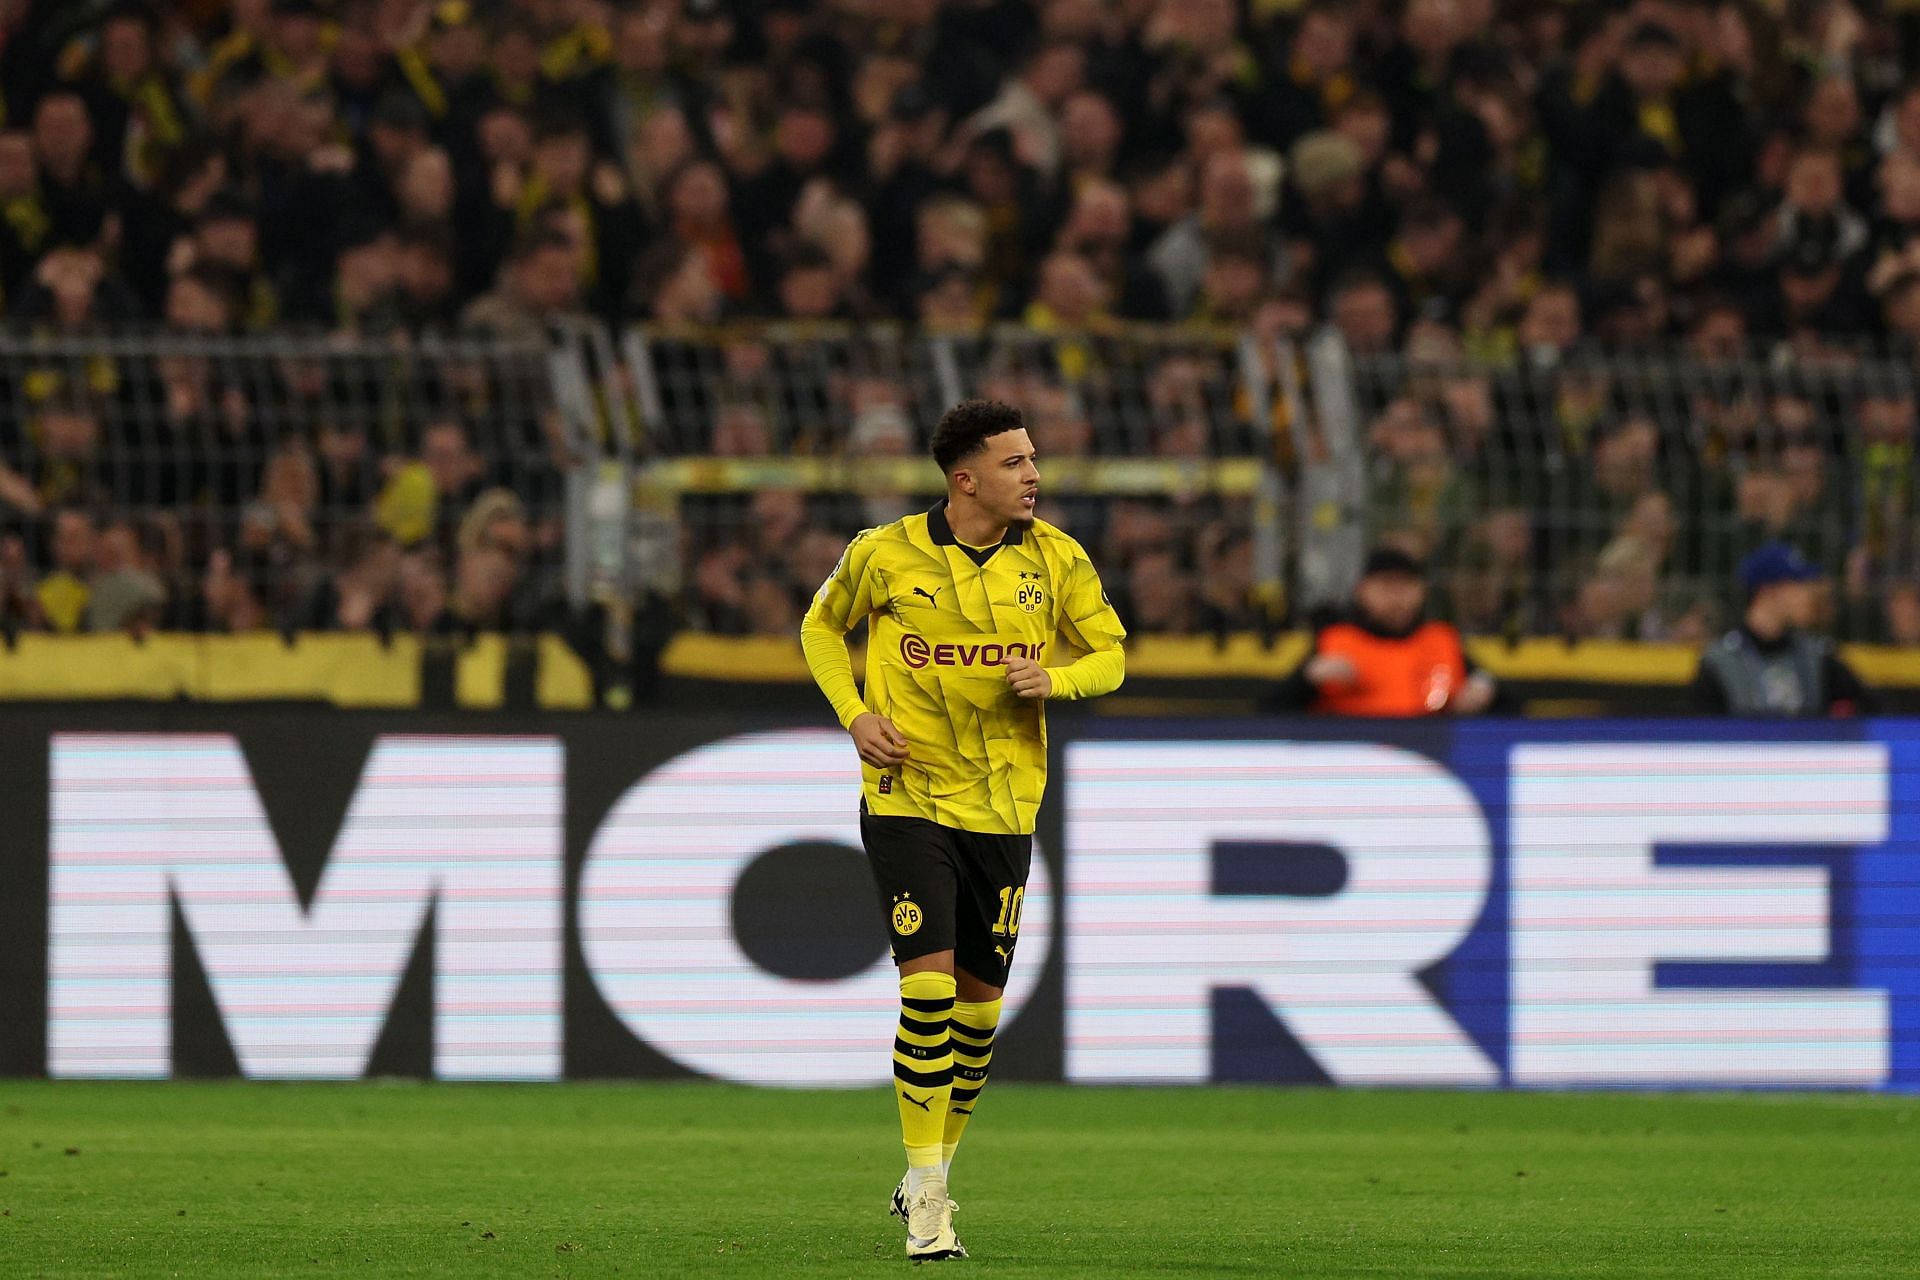 Jadon Sancho is unlikely to play again at Old Trafford